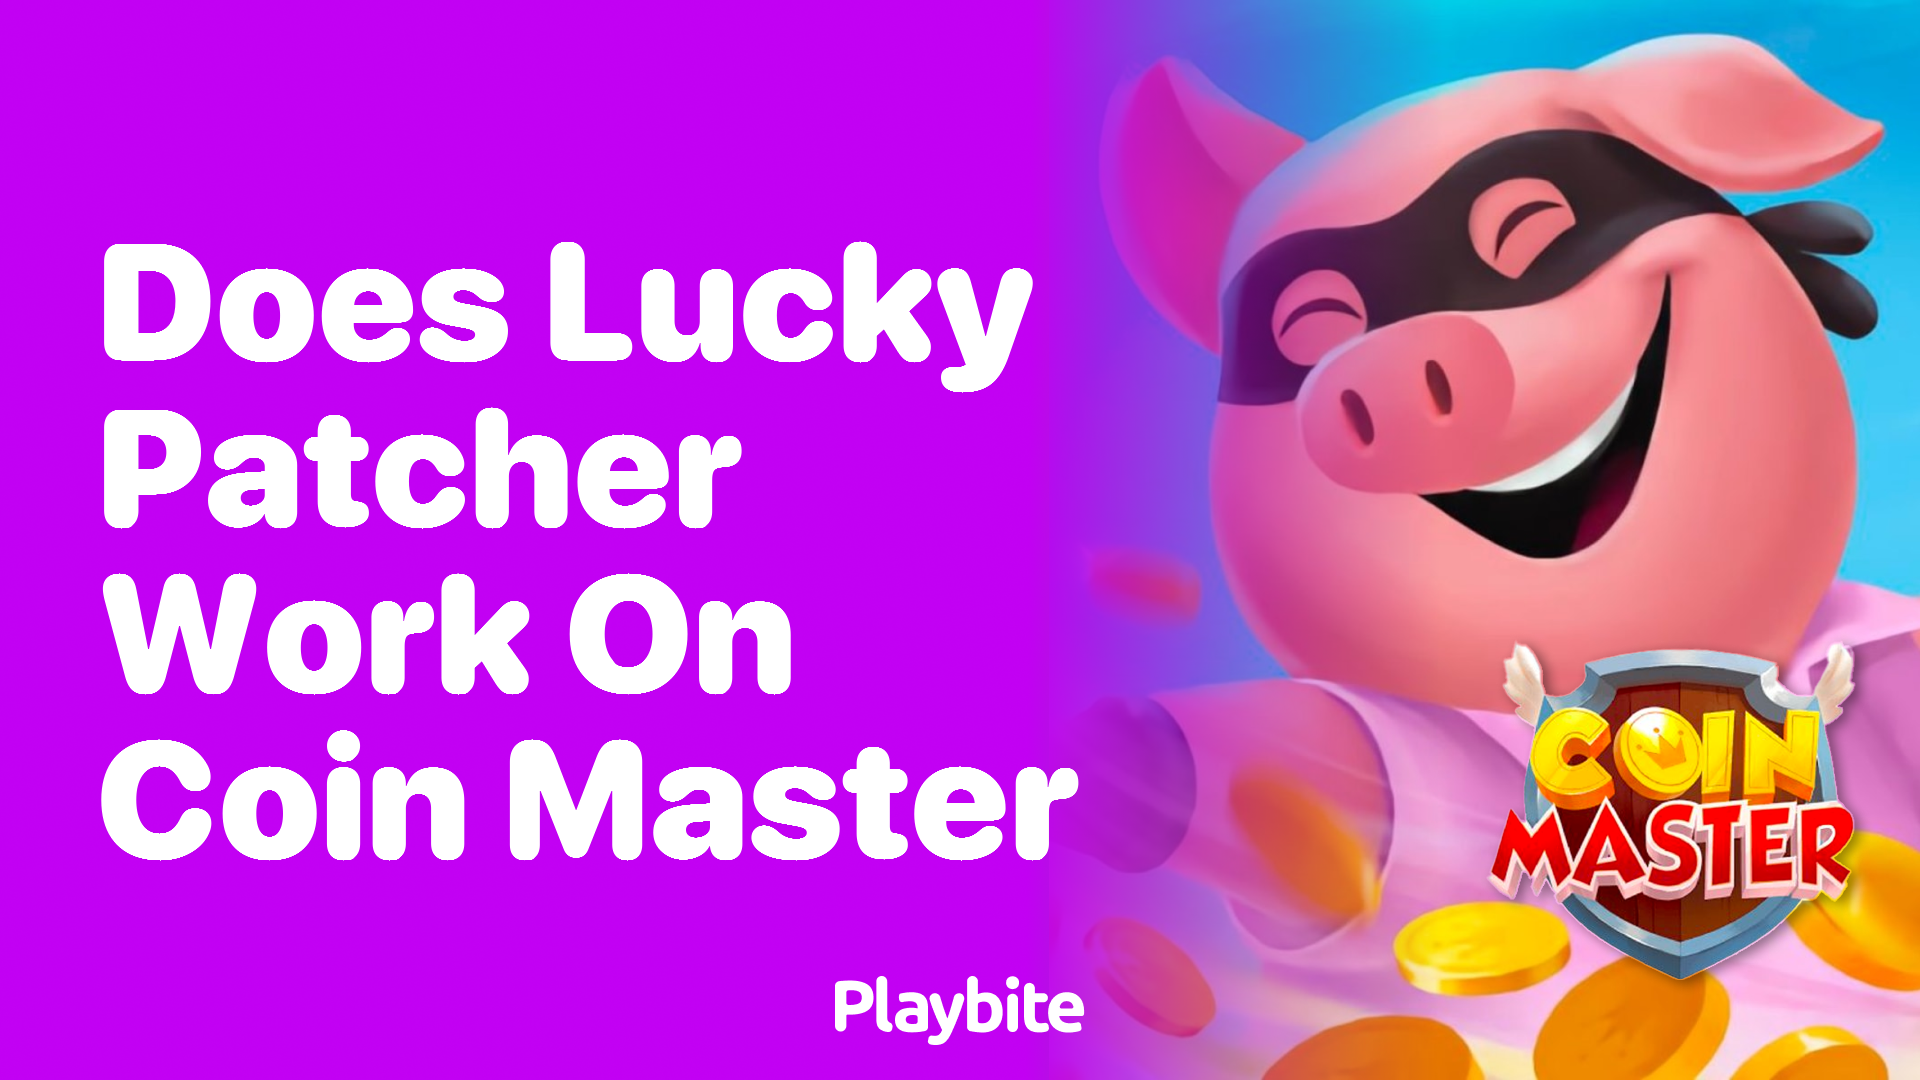 Does Lucky Patcher Work on Coin Master?